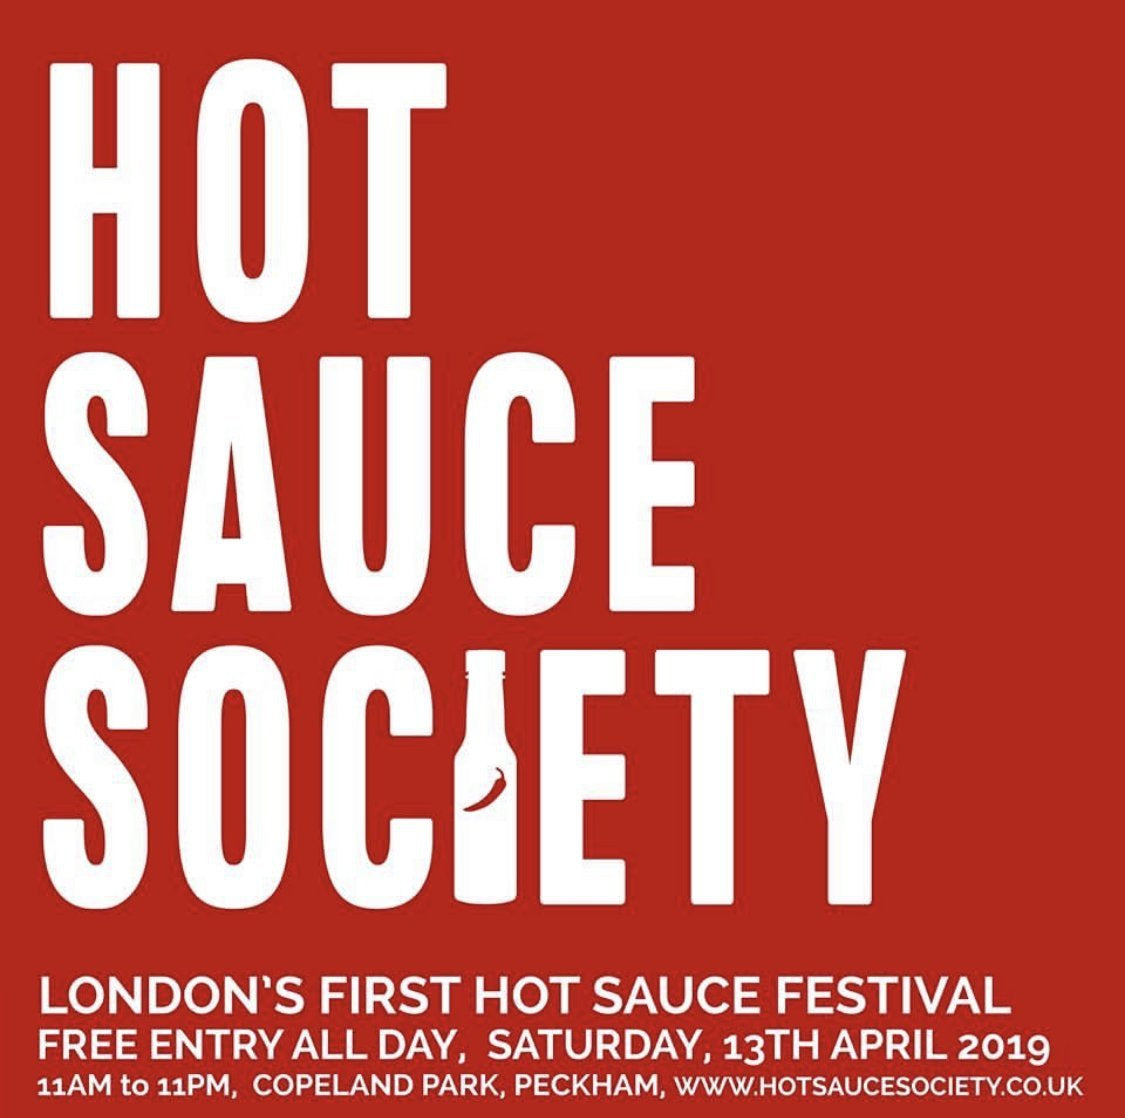 More Than Tacos at London’s First Hot Sauce Festival